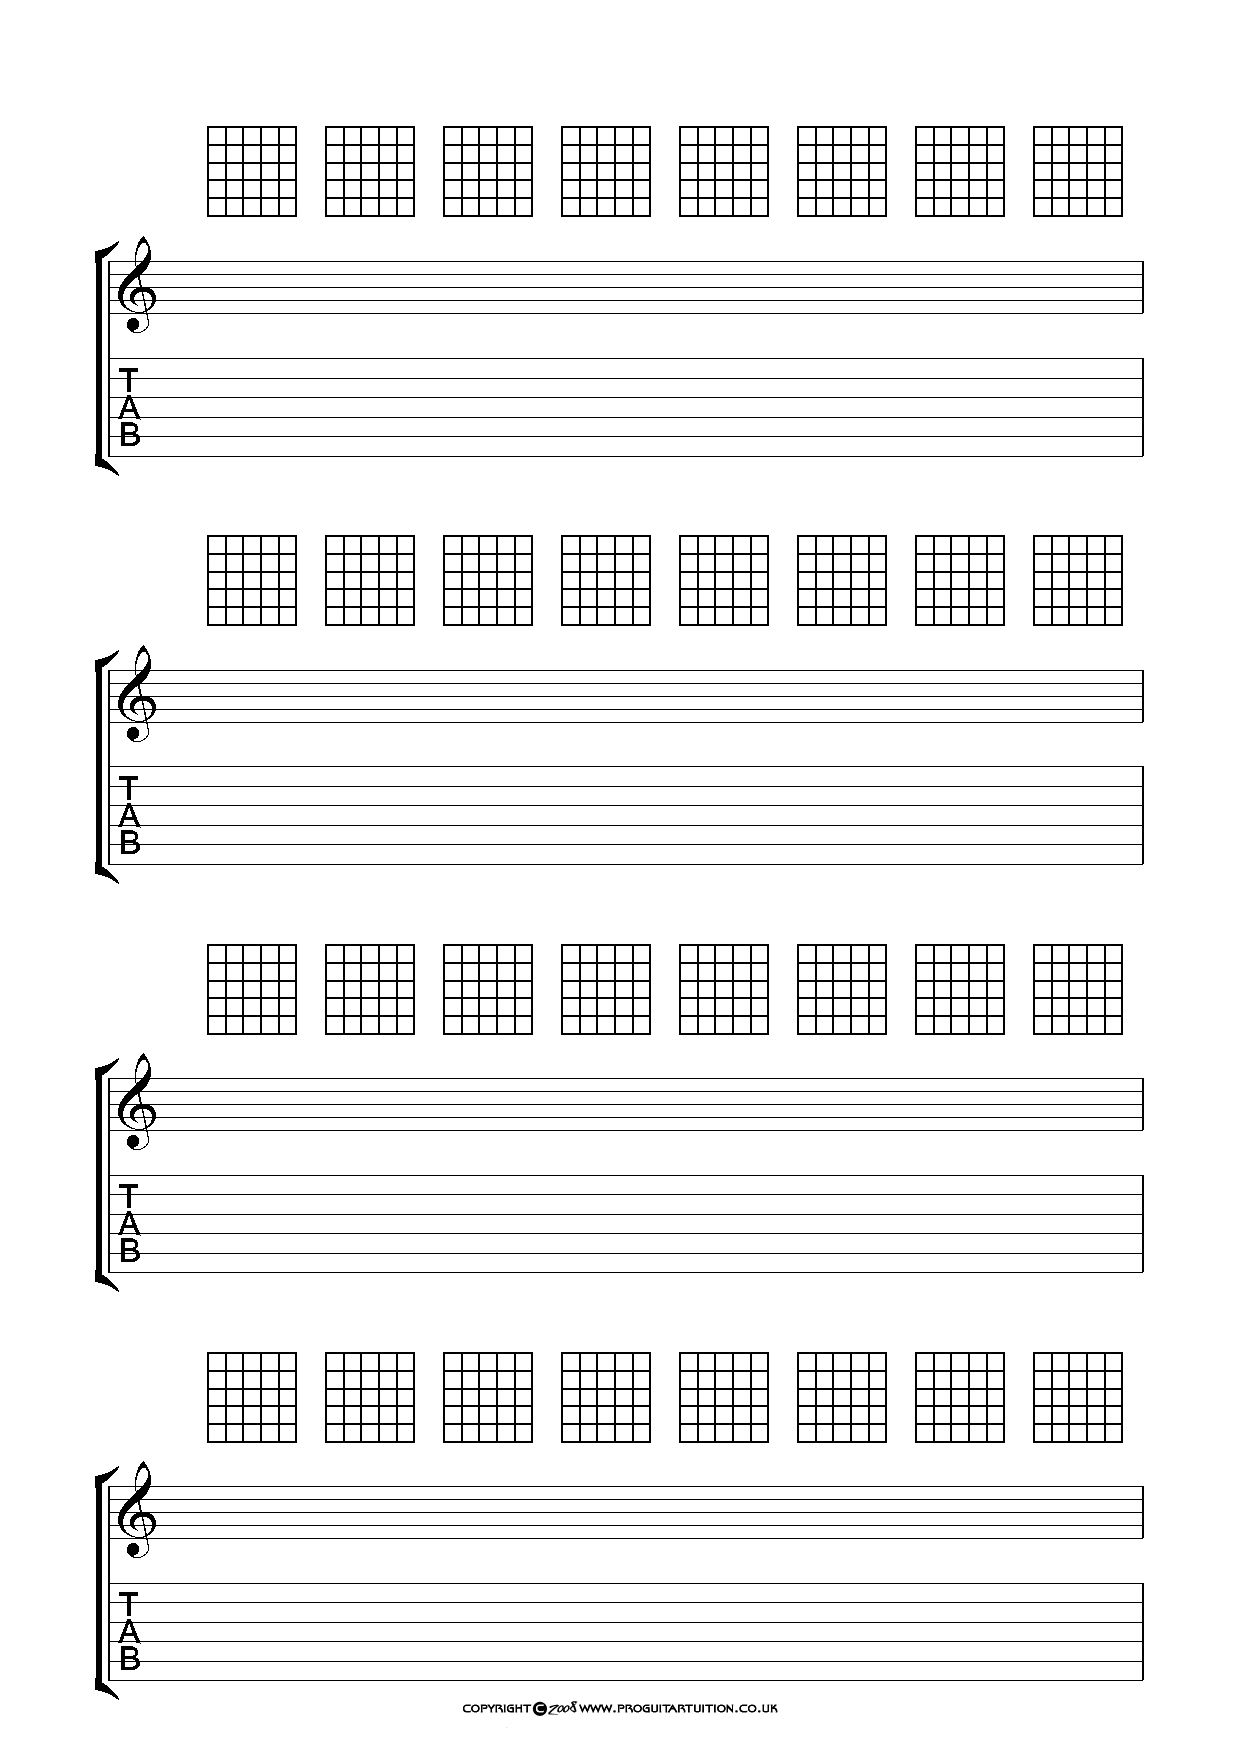 Blank Chord Sheets - Google Search | Guitar In 2019 | Pinterest - Free Printable Guitar Tablature Paper